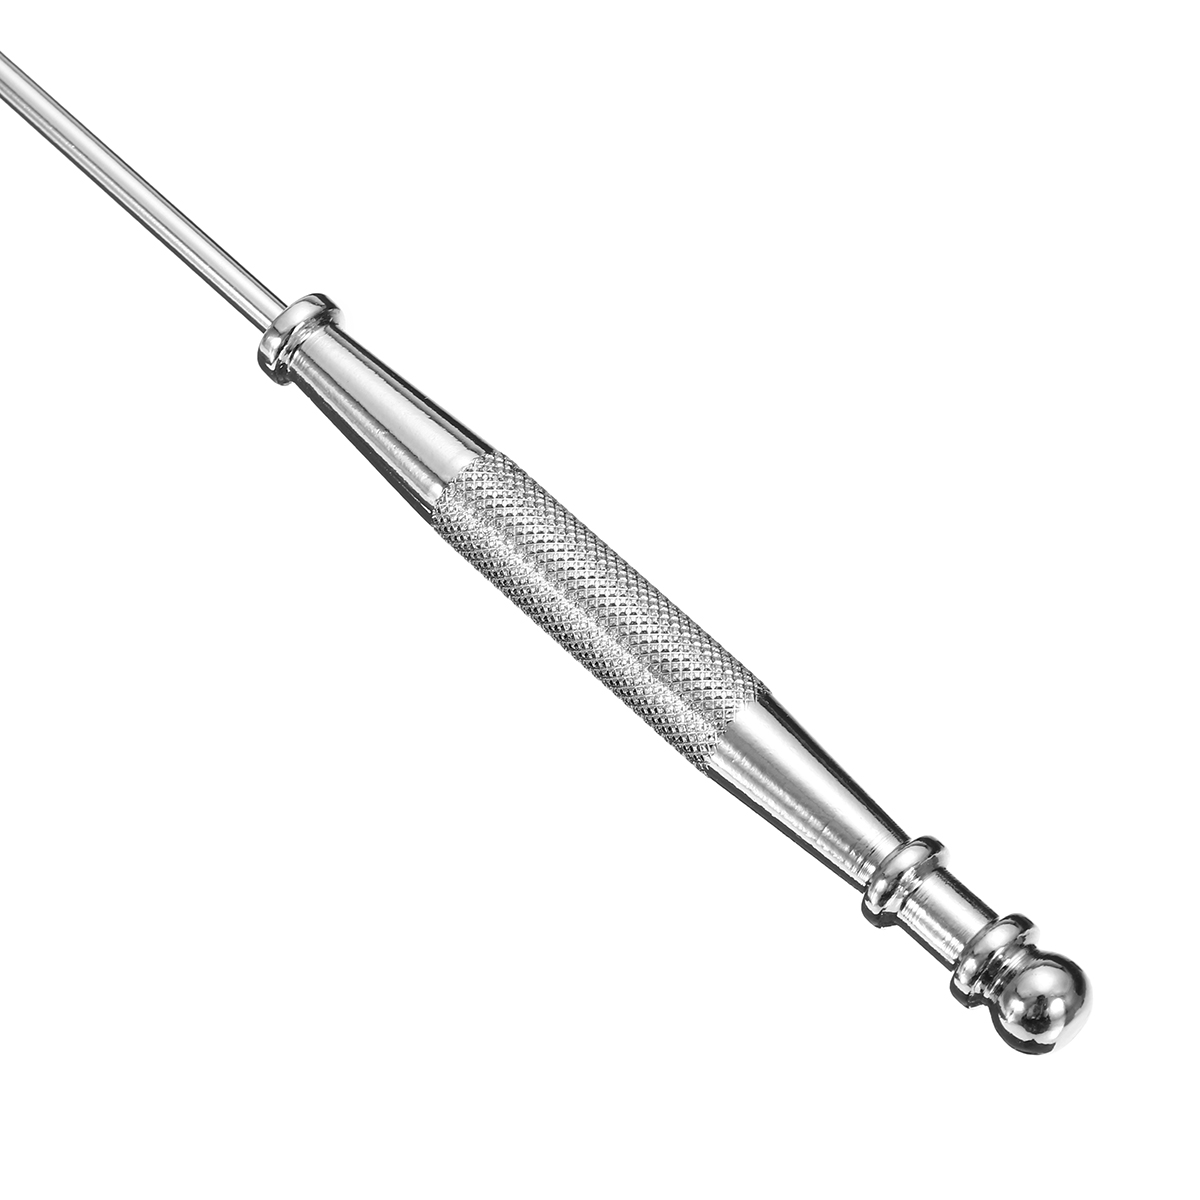 Stainless-Steel-Candle-Snuffer-Silver-Long-Extinguisher-for-Tea-Light-Candle-Tool-1252840-3